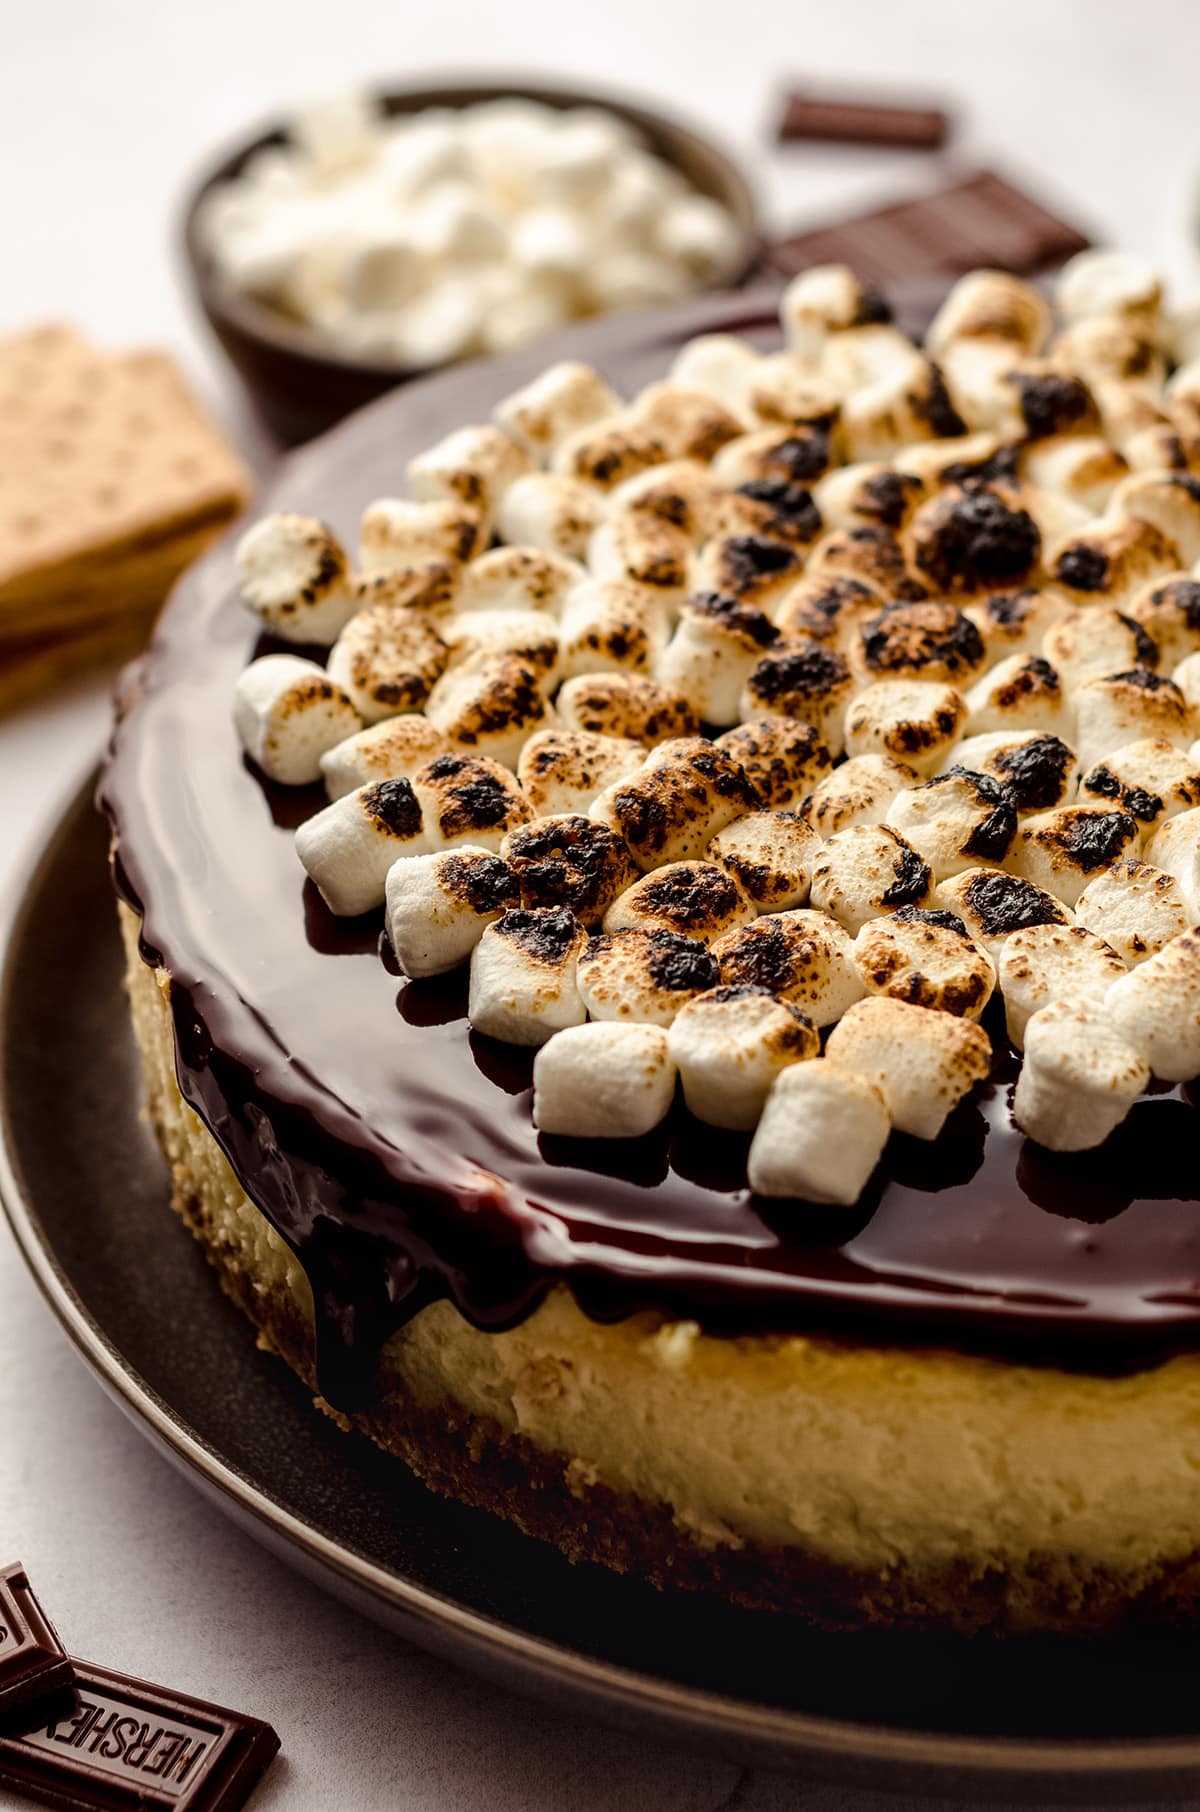 A chocolate topped cheesecake with a toasted marshmallow topping.